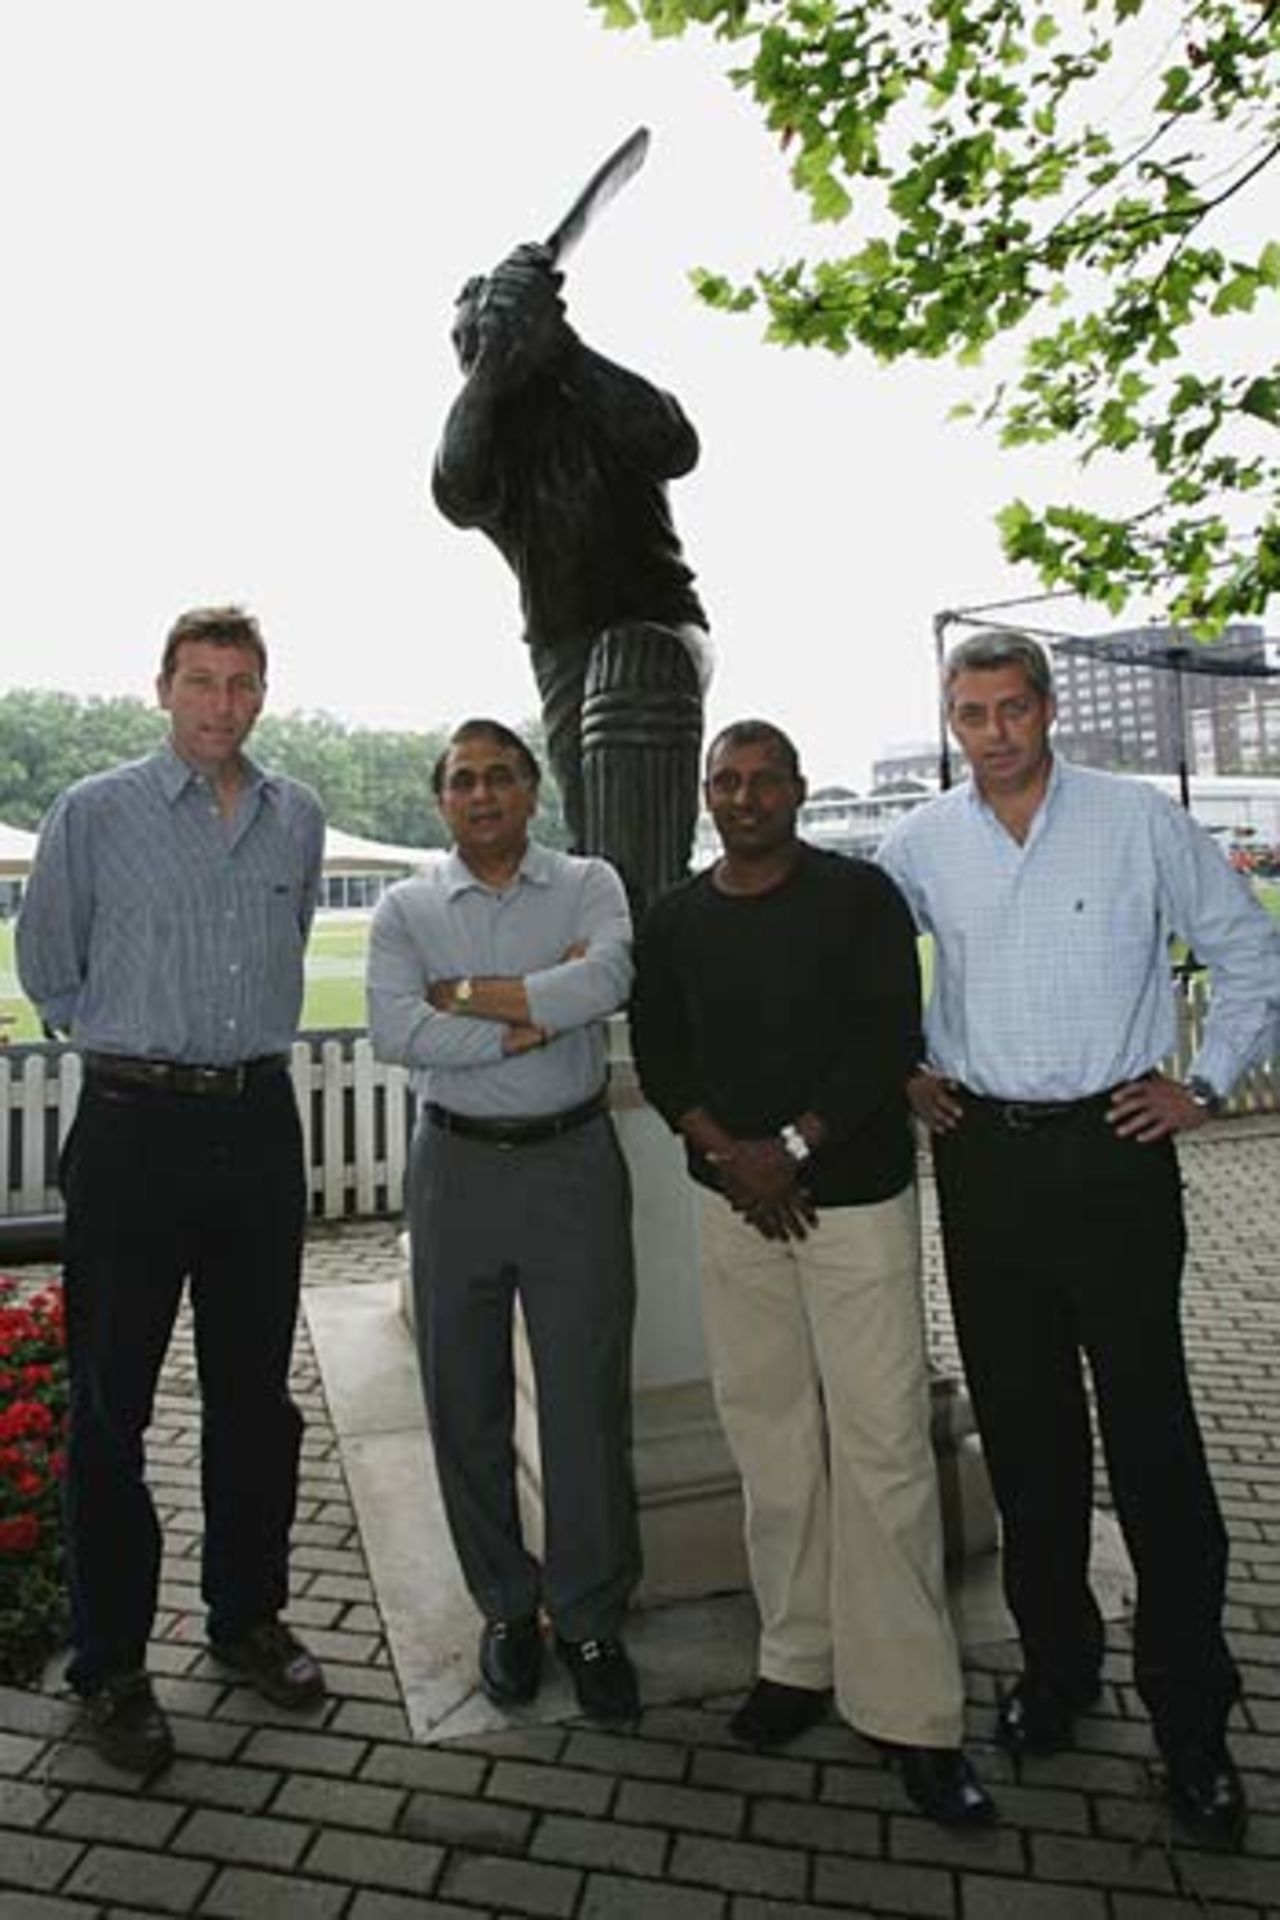 Mike Atherton, Sunil Gavaskar , Aravinda de Silva and Dave Richardson meet to discuss the selection of ICC World XI players for the forthcoming Super Series, Lord's, June 29, 2005